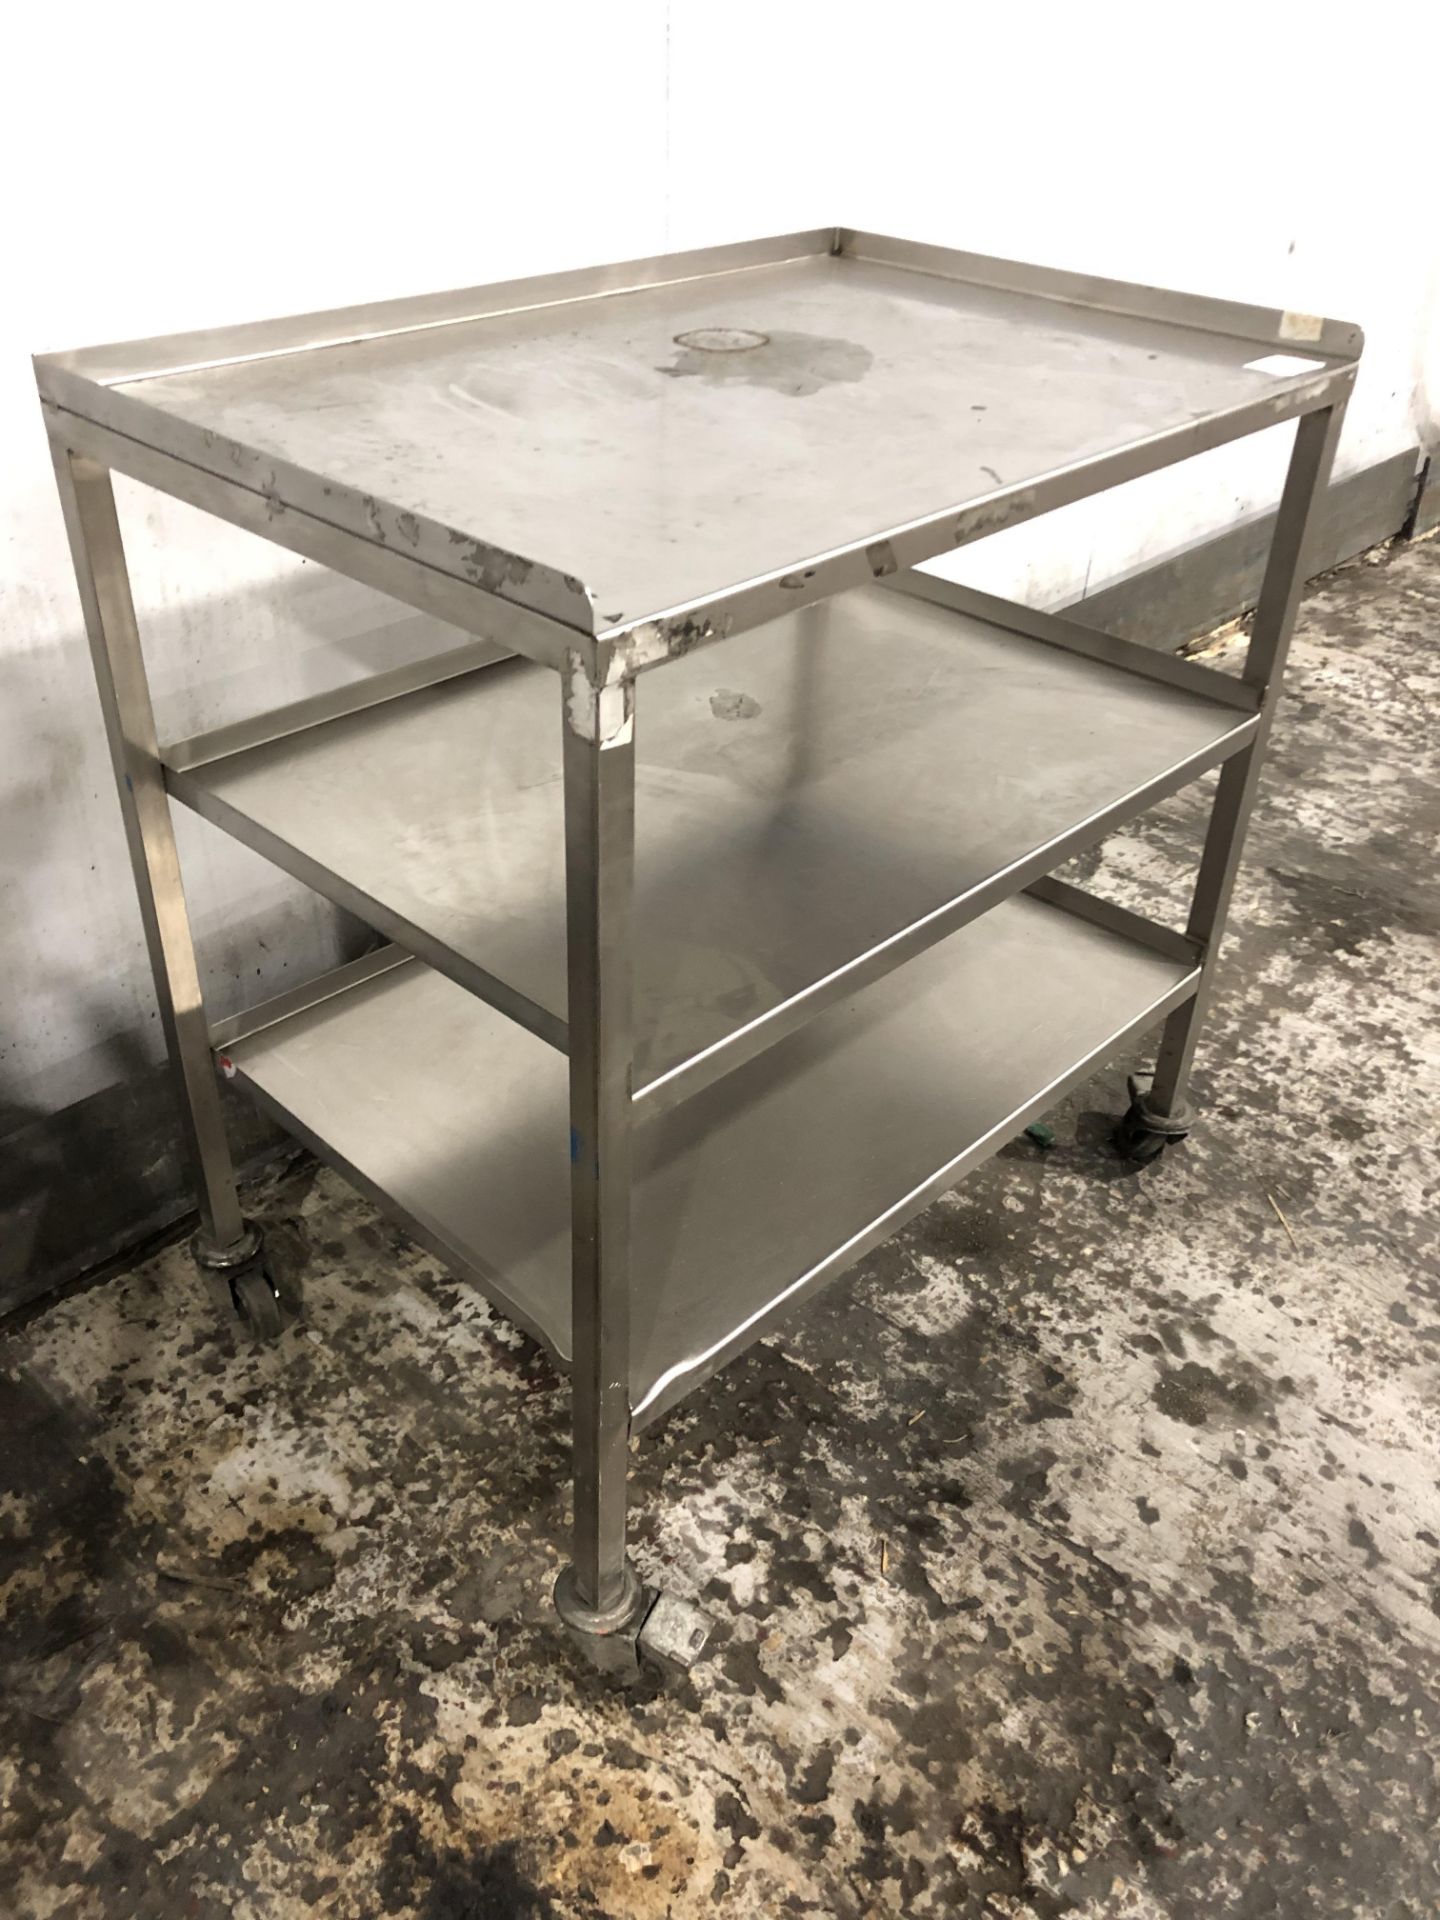 Stainless Steel Three Tier Trolley - Image 2 of 2